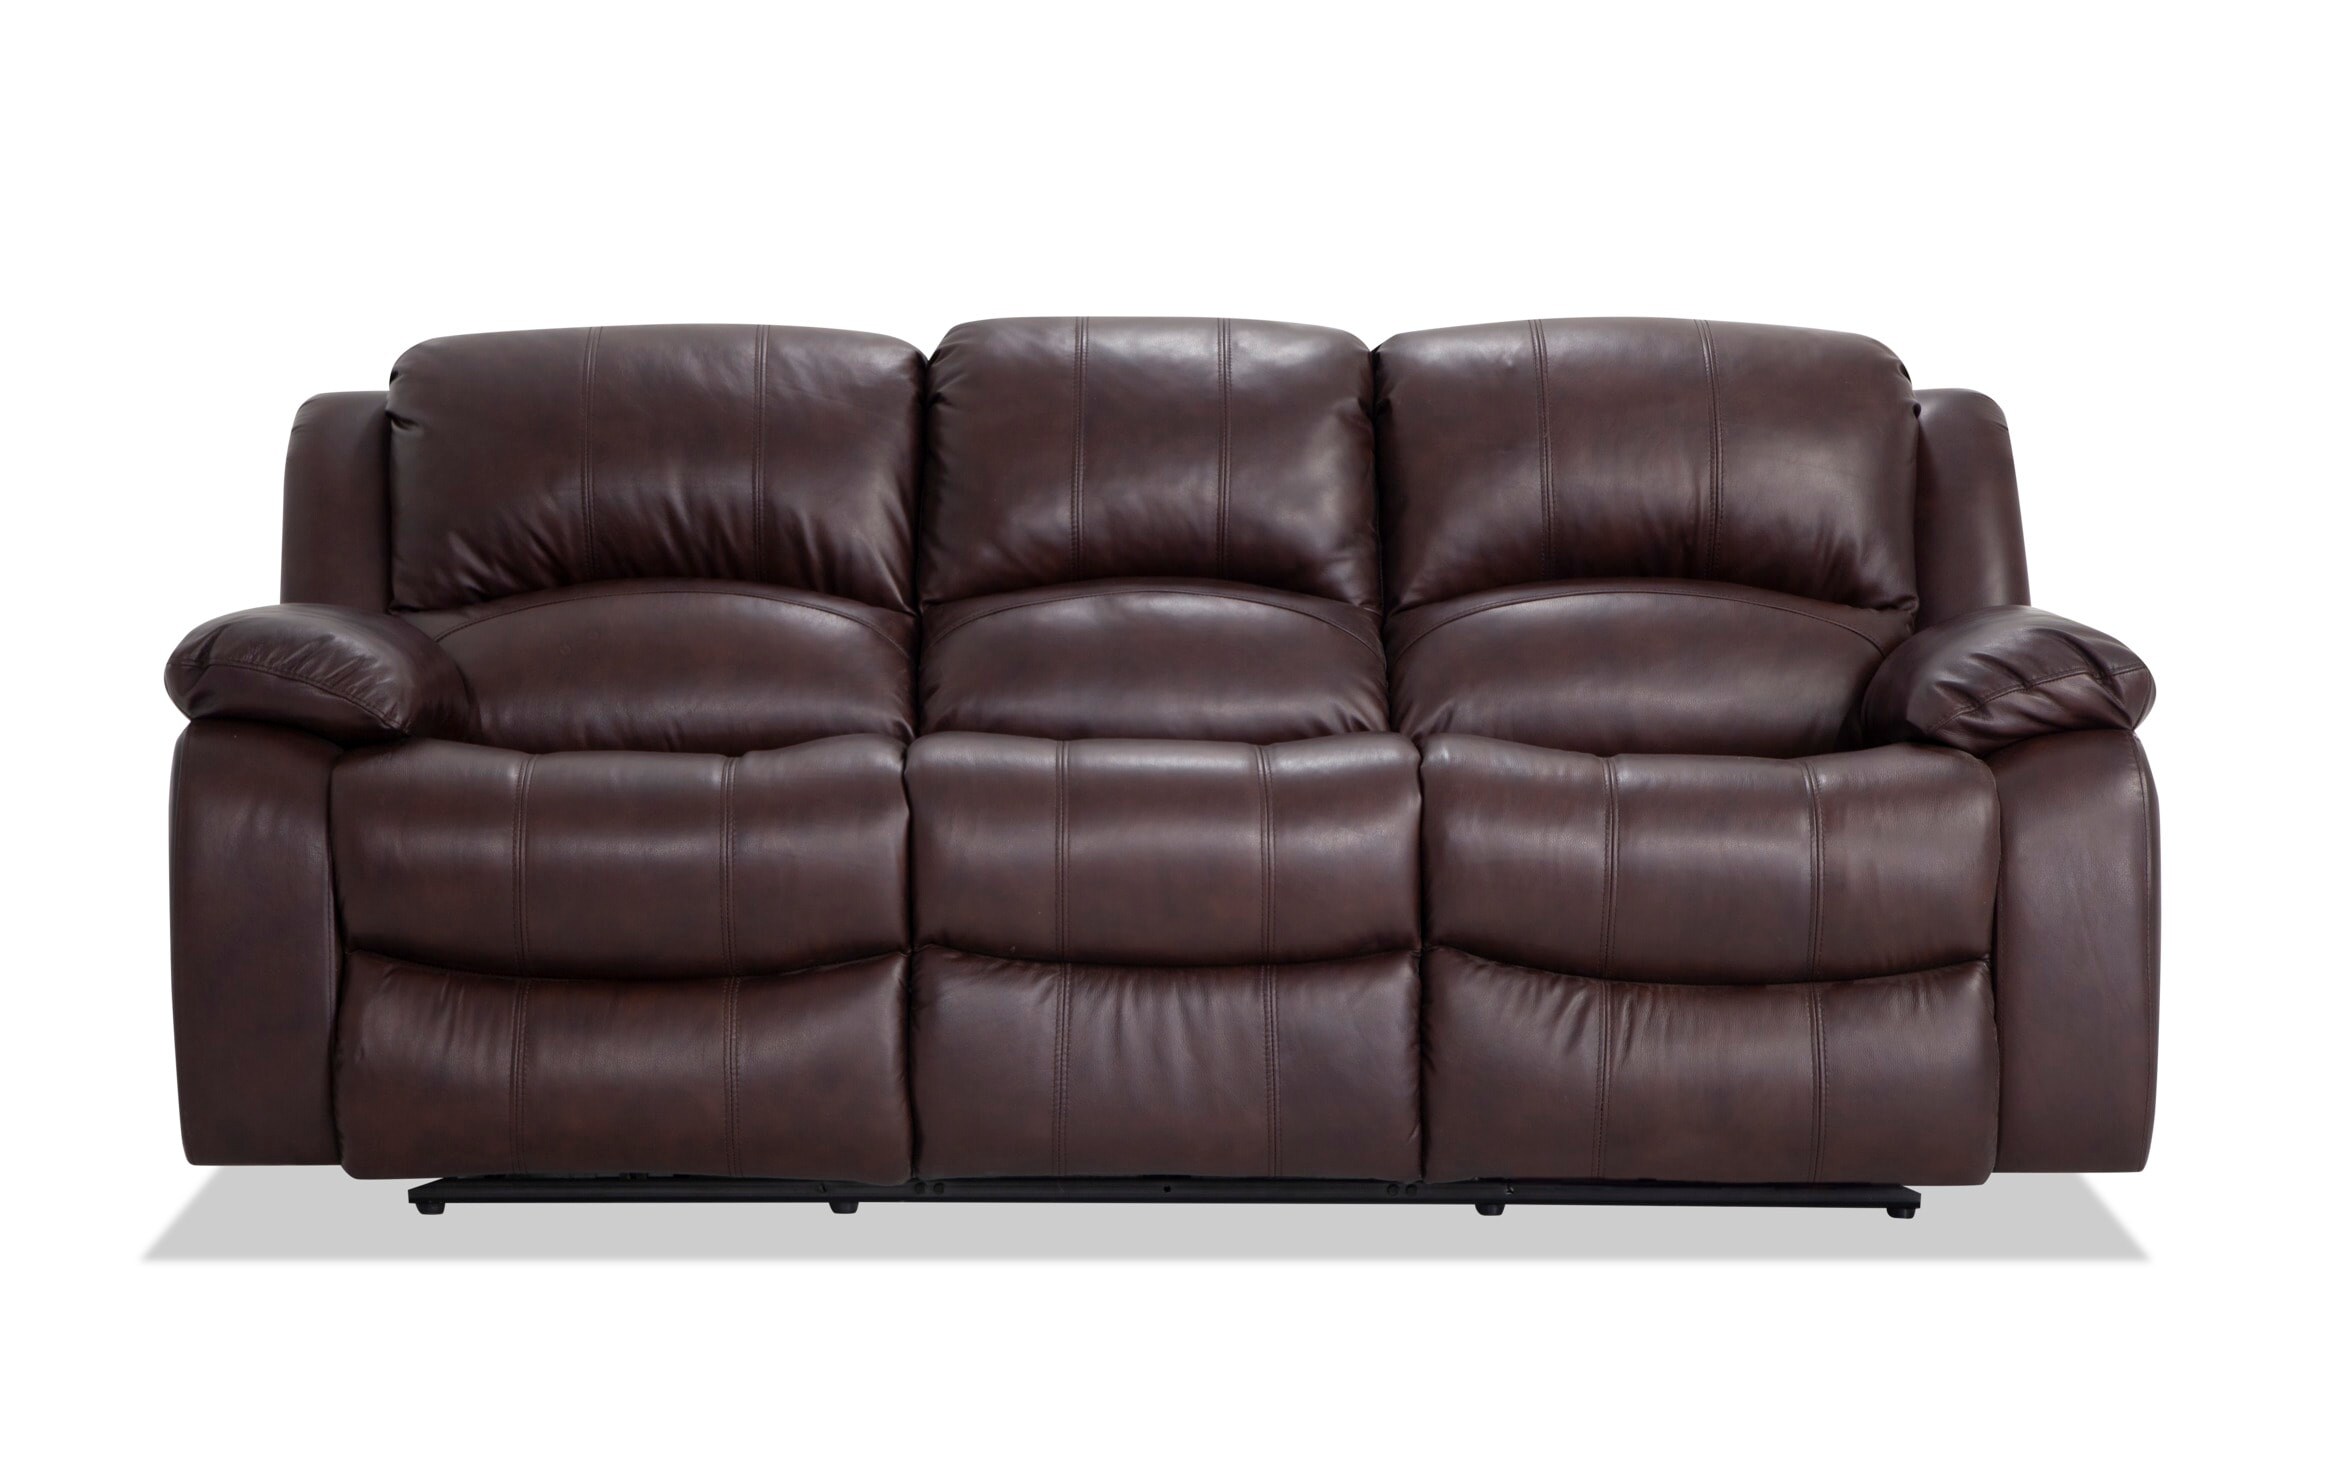 Olympus Brown Leather Power Reclining, Leather Power Reclining Sectional